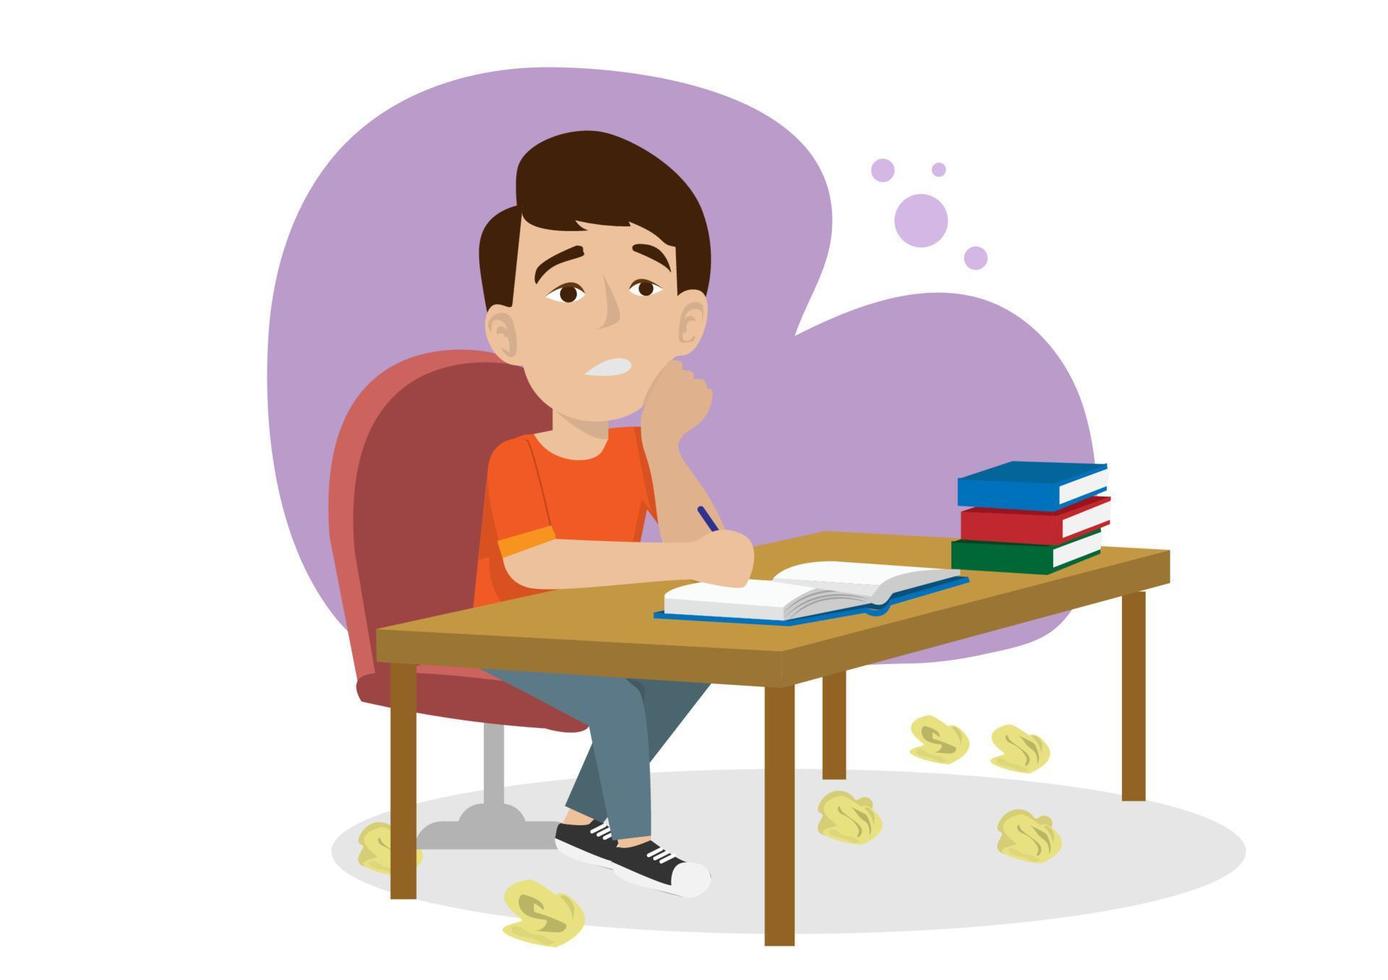 The male student sat on the table with books beside him. He could not think of work, causing a bad mood. Flat style cartoon illustration vector